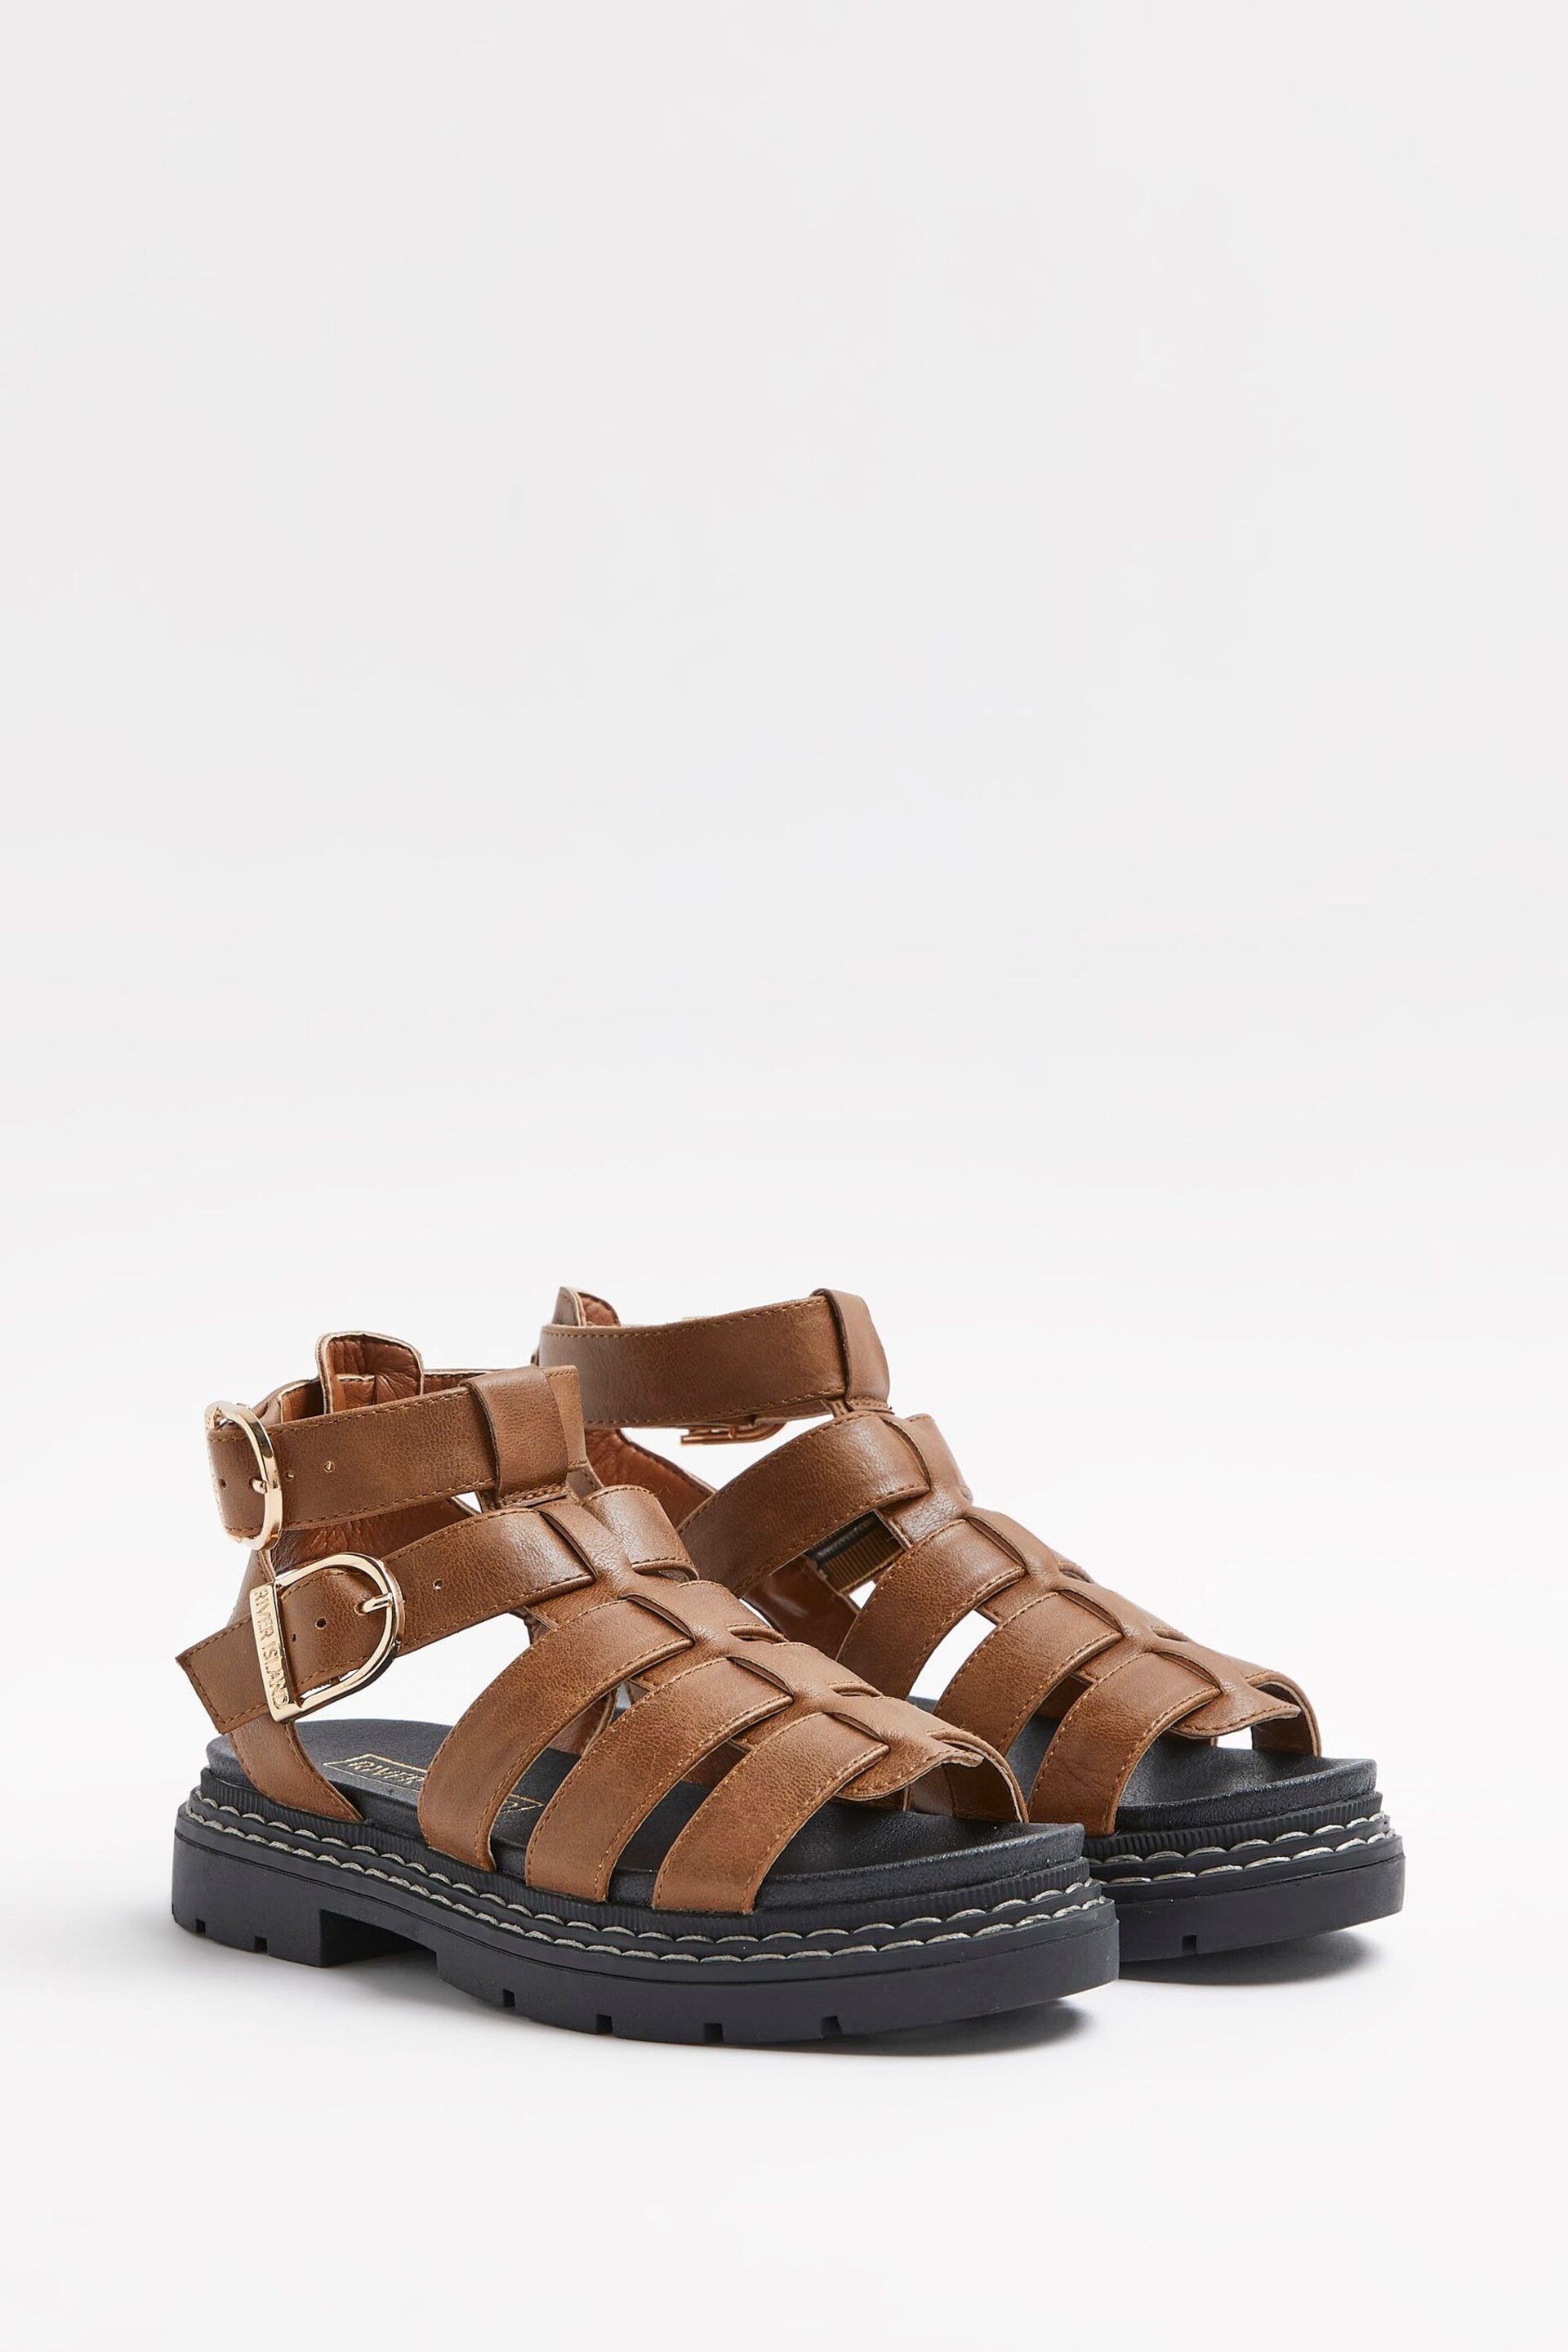 River Island Girls Brown Gladiator Cleated Sandals - Image 2 of 4